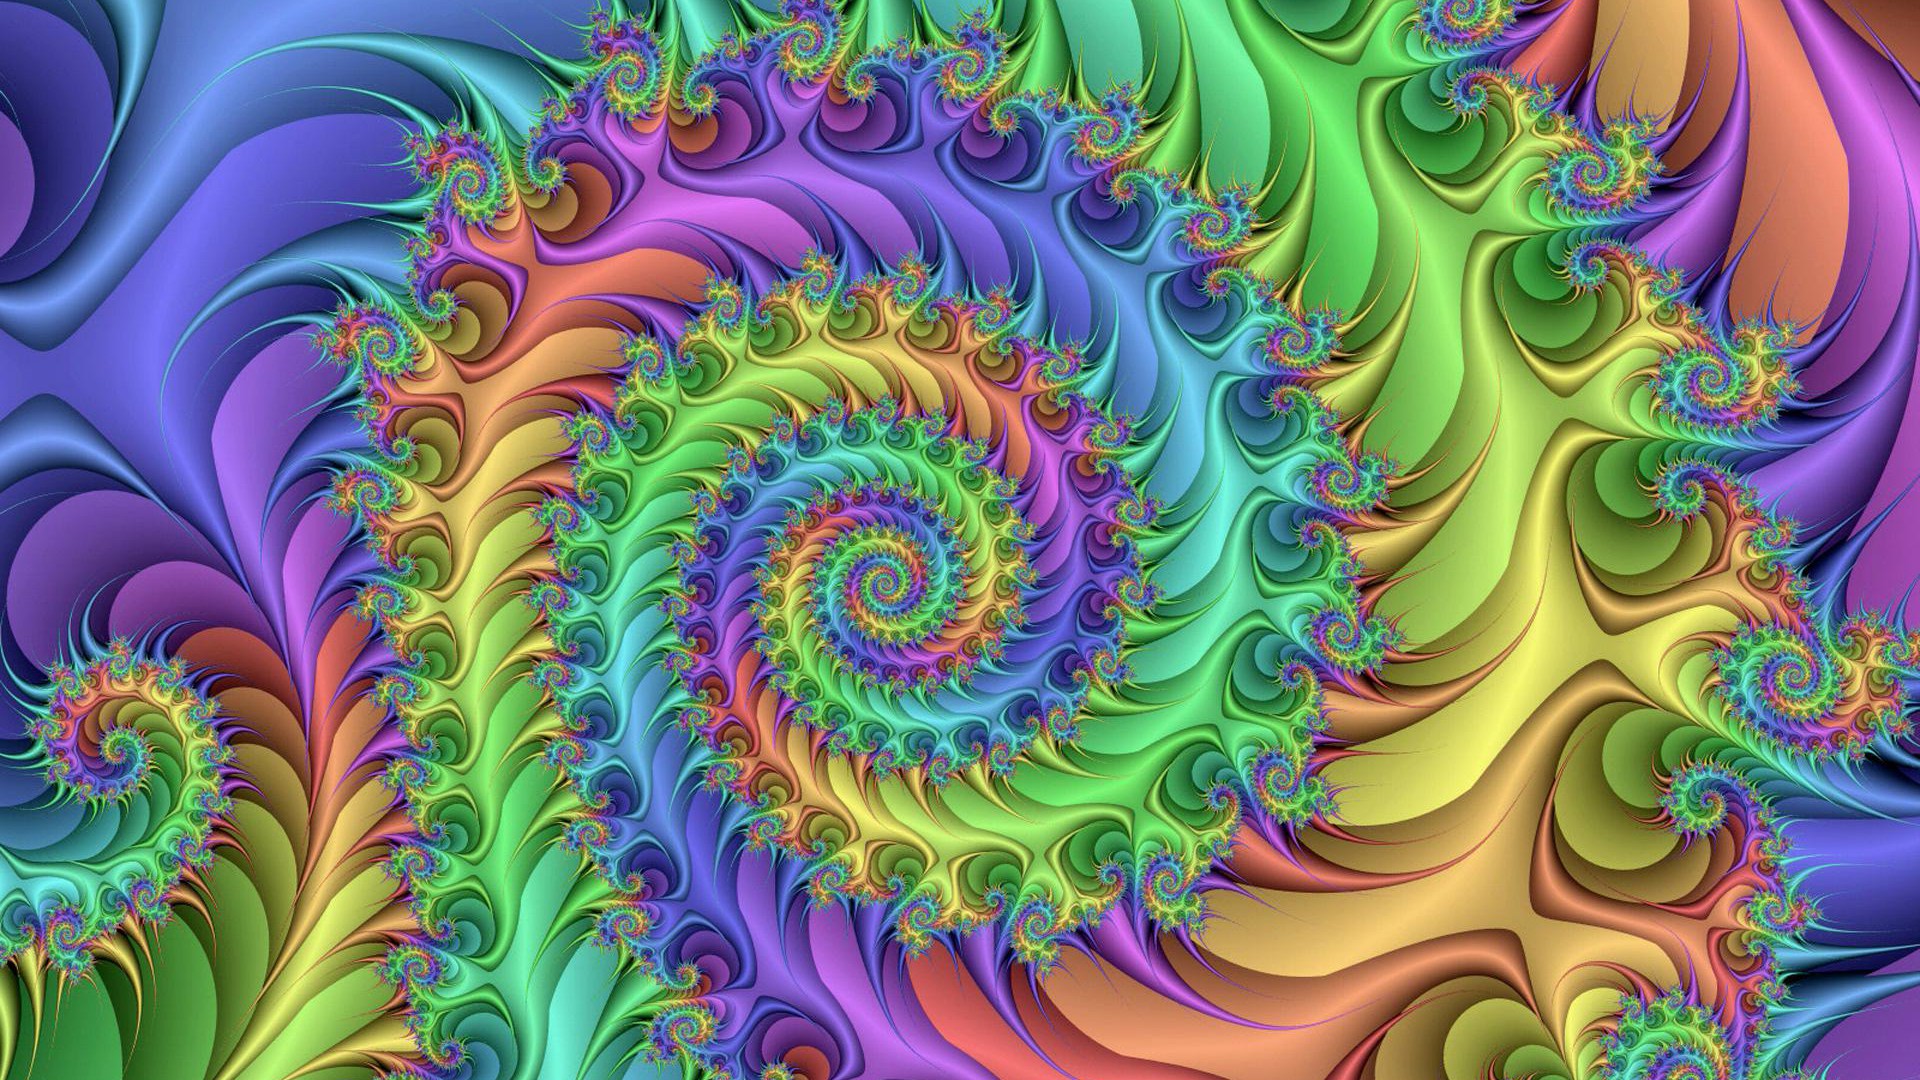 High Resolution Trippy Image HD Wallpaper Full Size ...